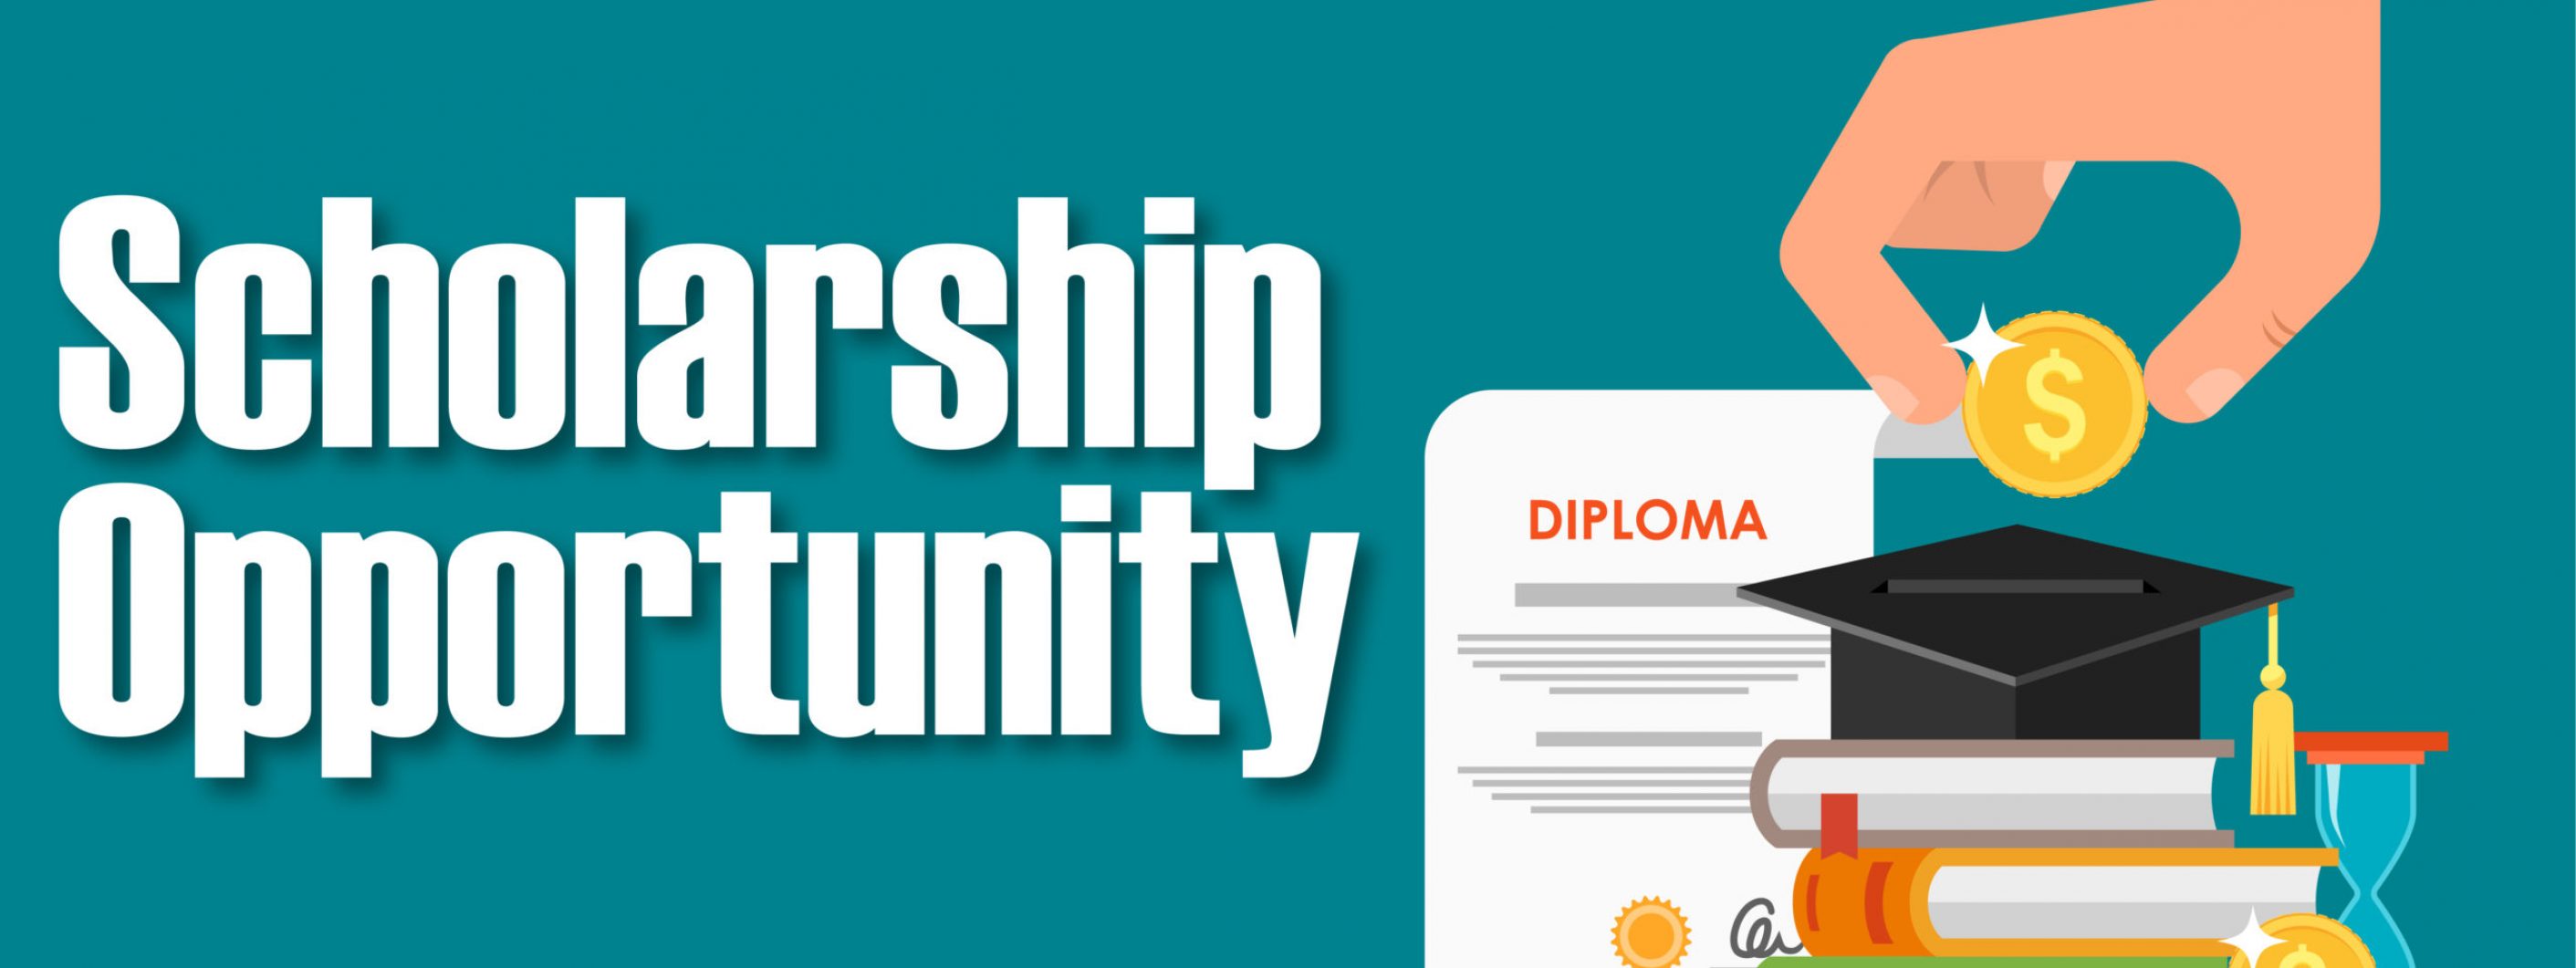 Scholarship-Opportunities for foreign studies